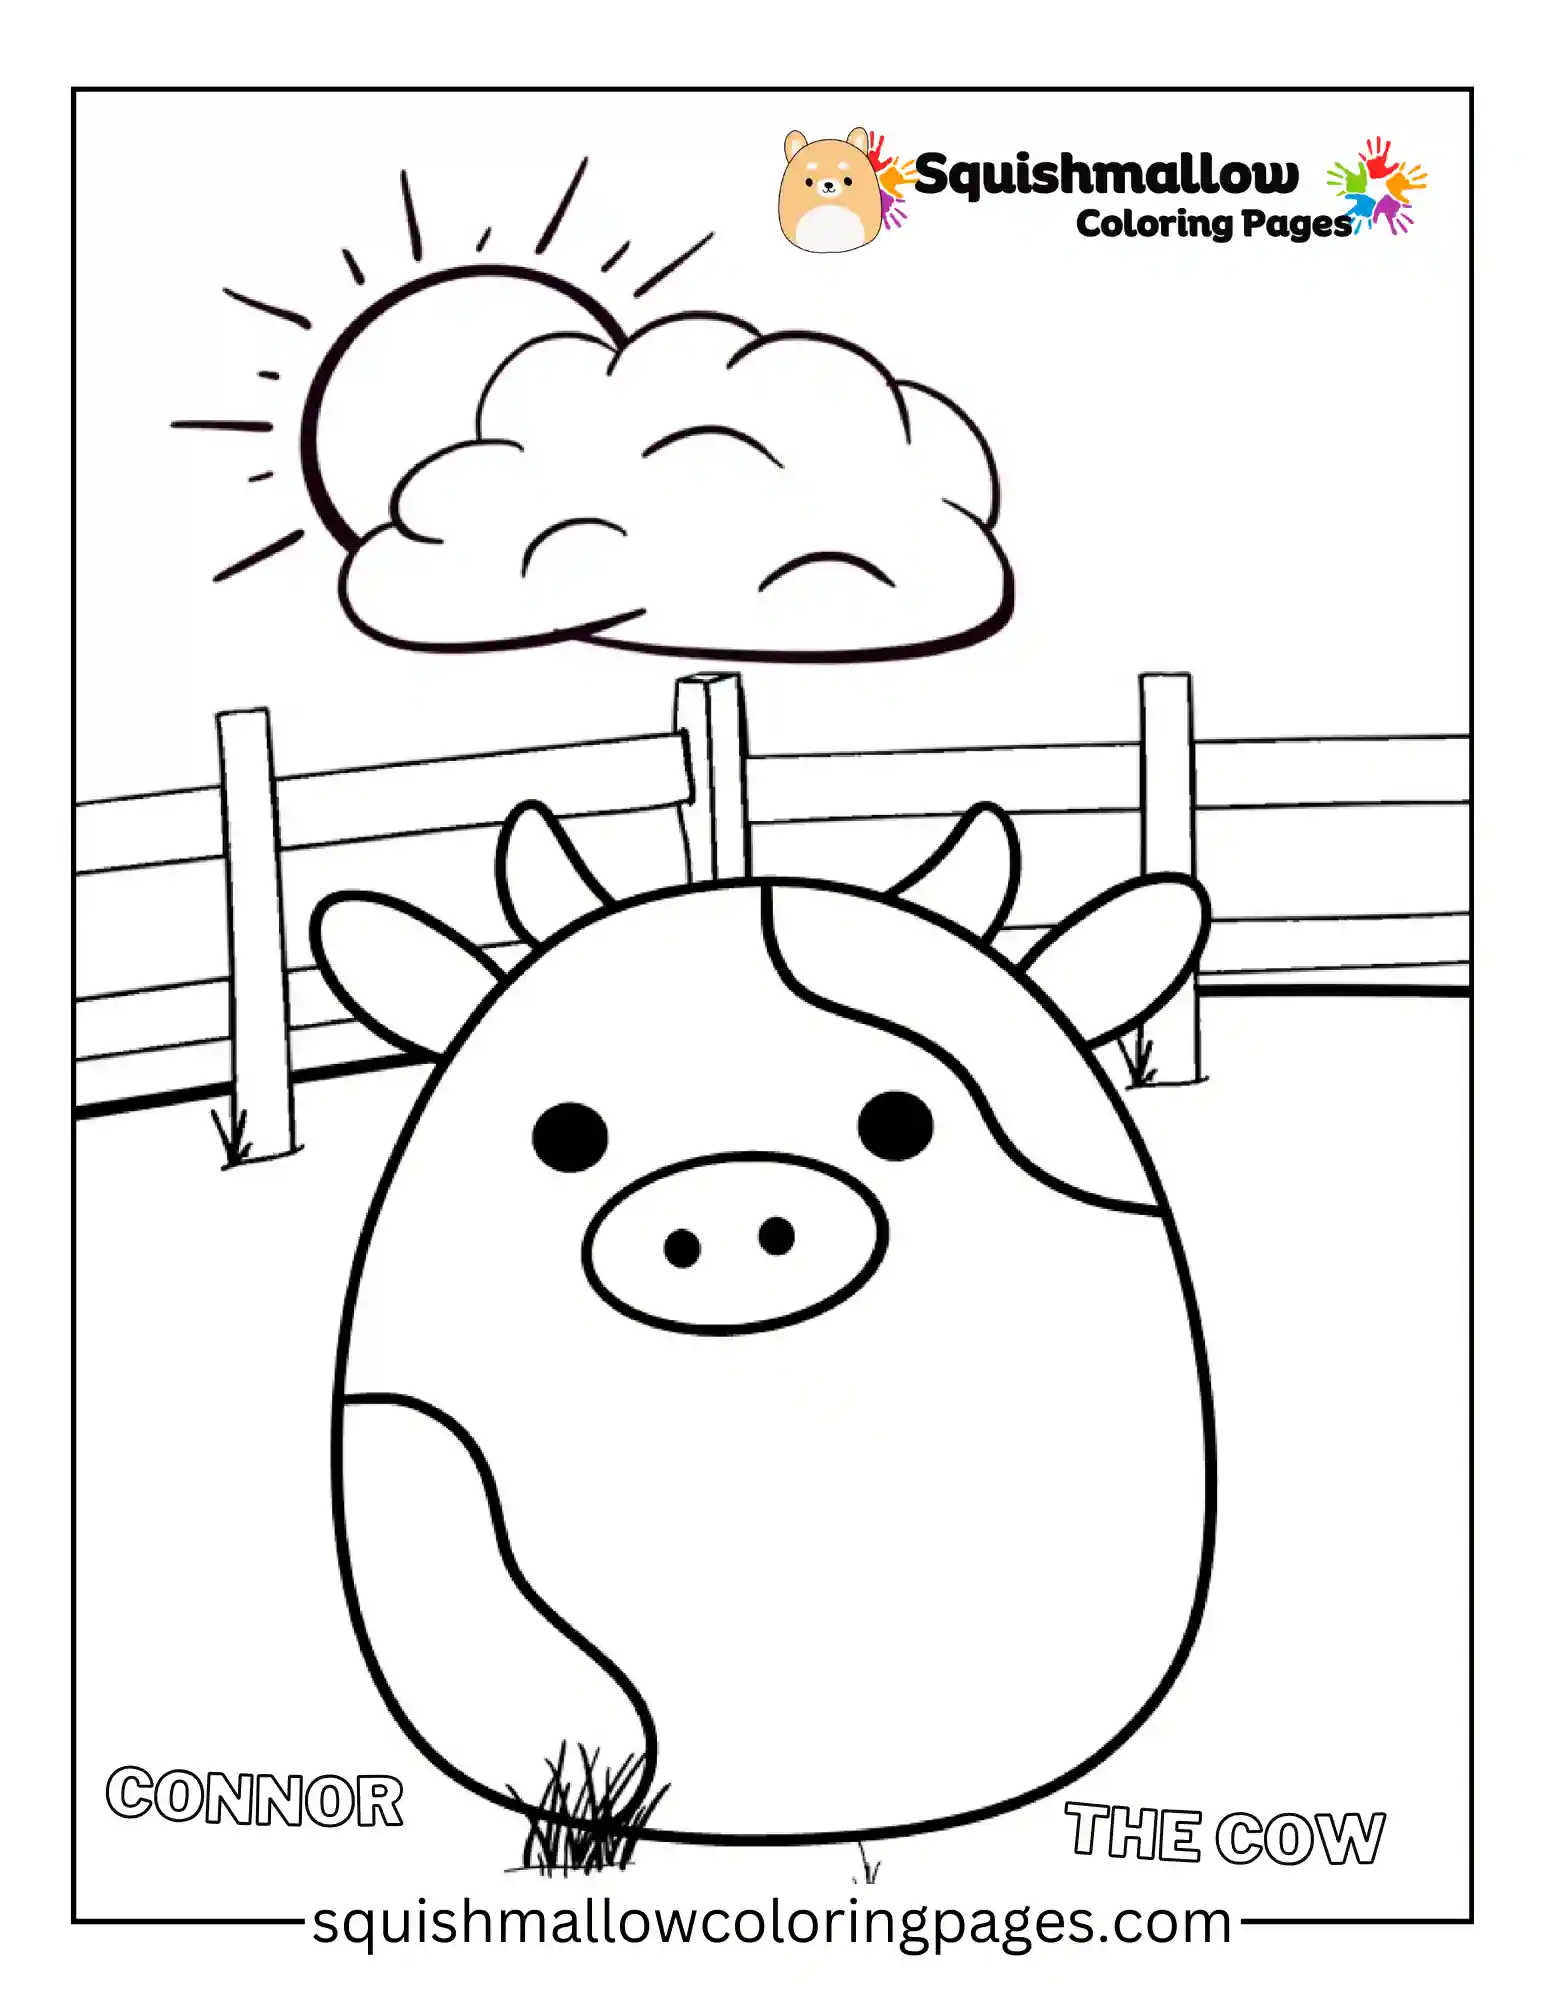 Connor The Cow Squishmallow Coloring Pages